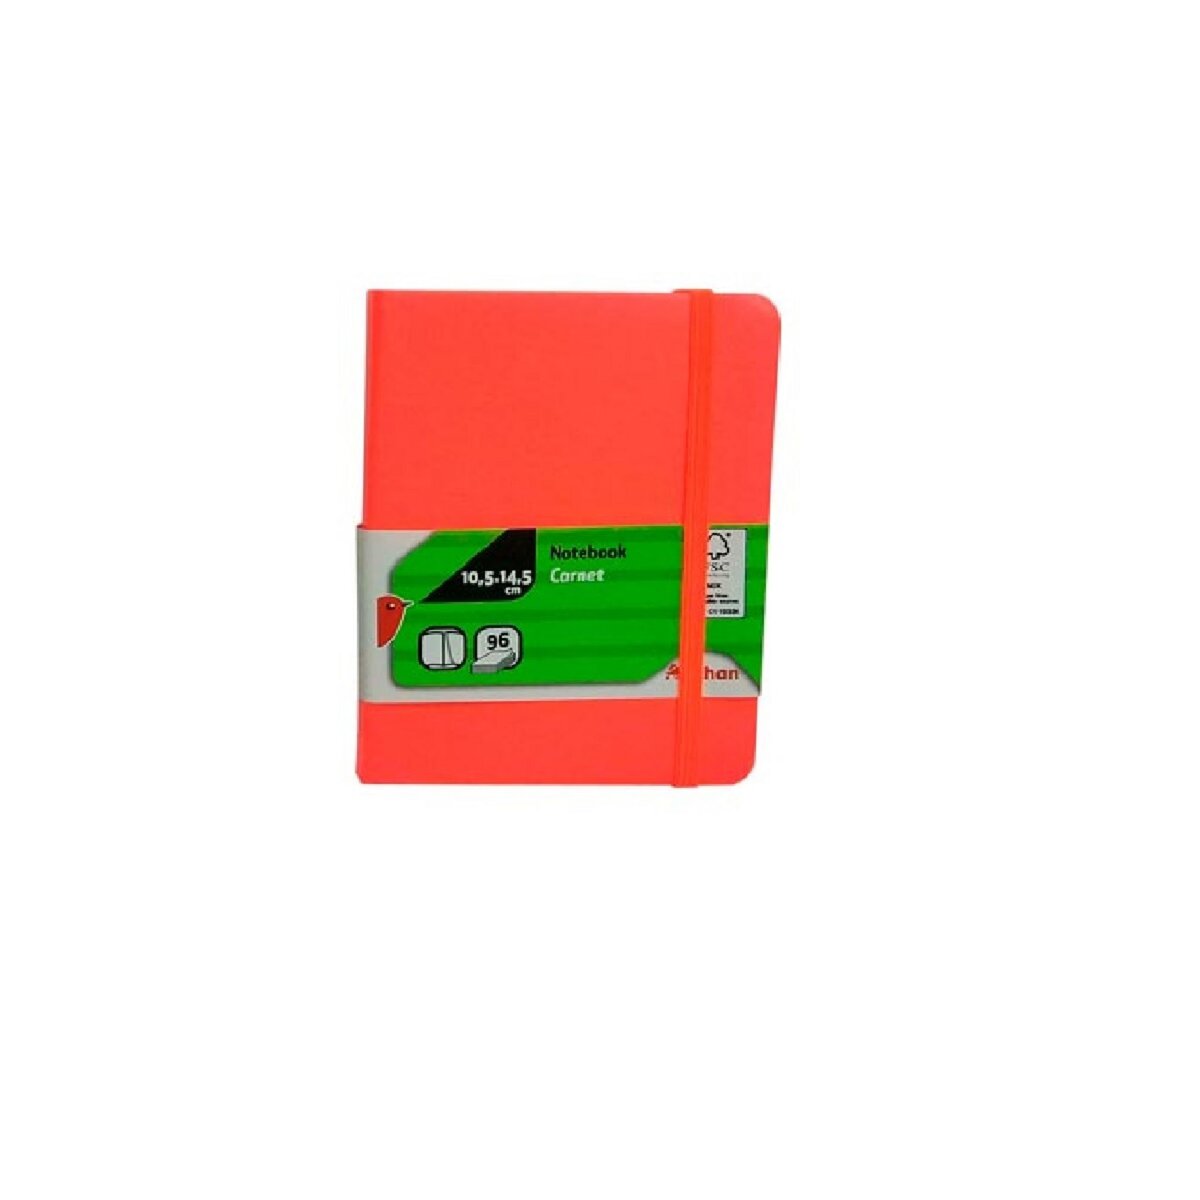 AUCHAN Cahier Notebook A6 - 96 pages - Fluo - Orange